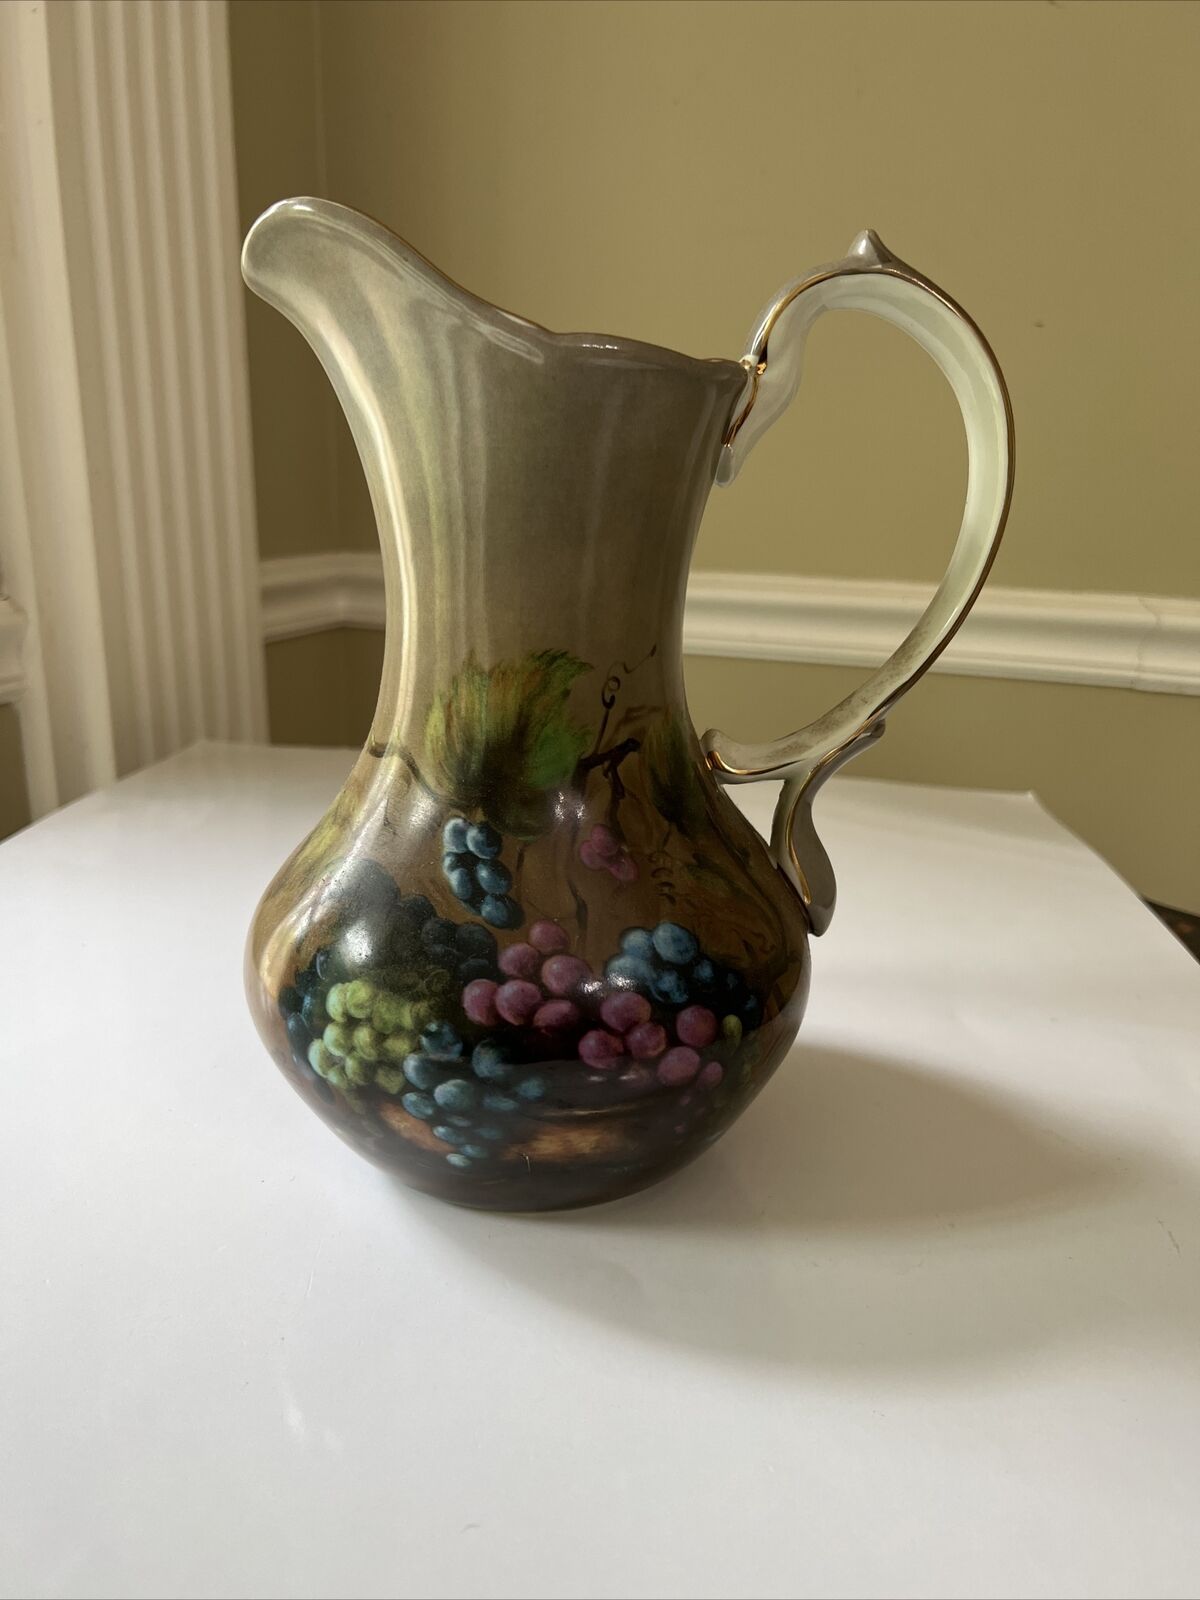 BEAUTIFUL VINEYARD BLESSINGS LARGE PITCHER BY LISA WHITE ARTS COOKSVILLE, TN